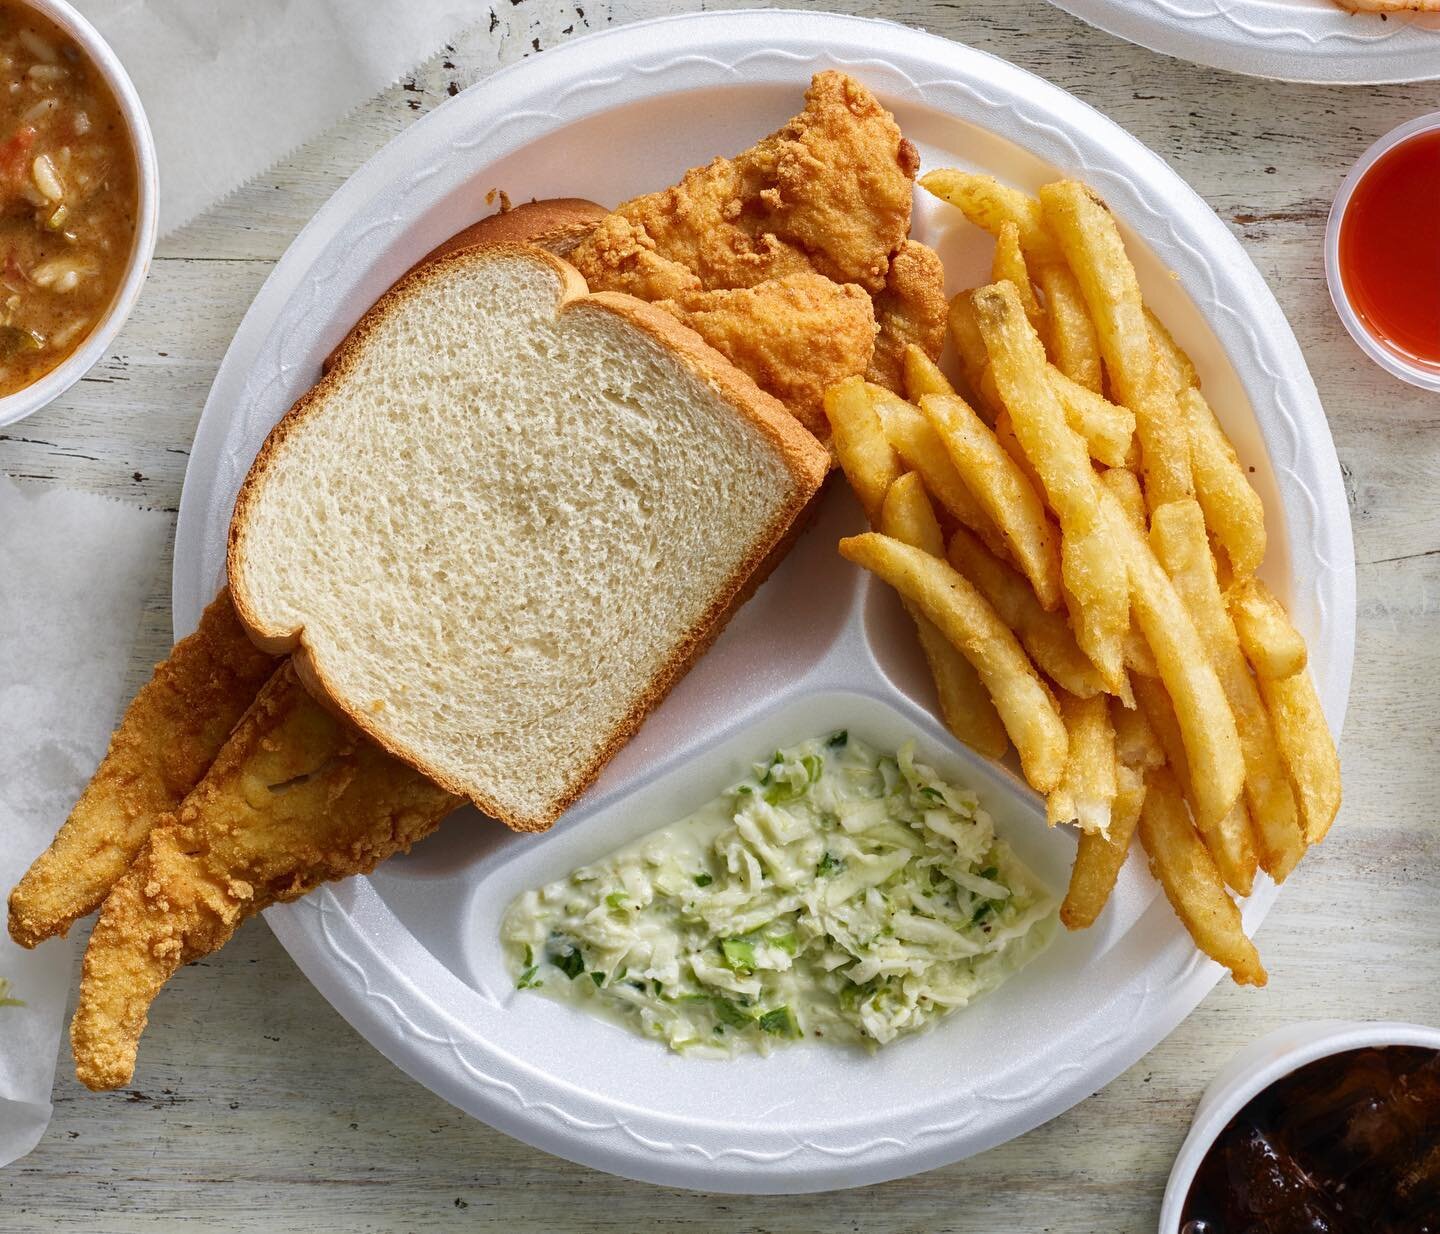 Fish Frydays aren&rsquo;t the same without our house made eastern NC coleslaw. 🤩🥬 

Did you know you can purchase our coleslaw in large quantities for your cookouts &amp; events? 

Browse our online ordering platform under sides to view the differe